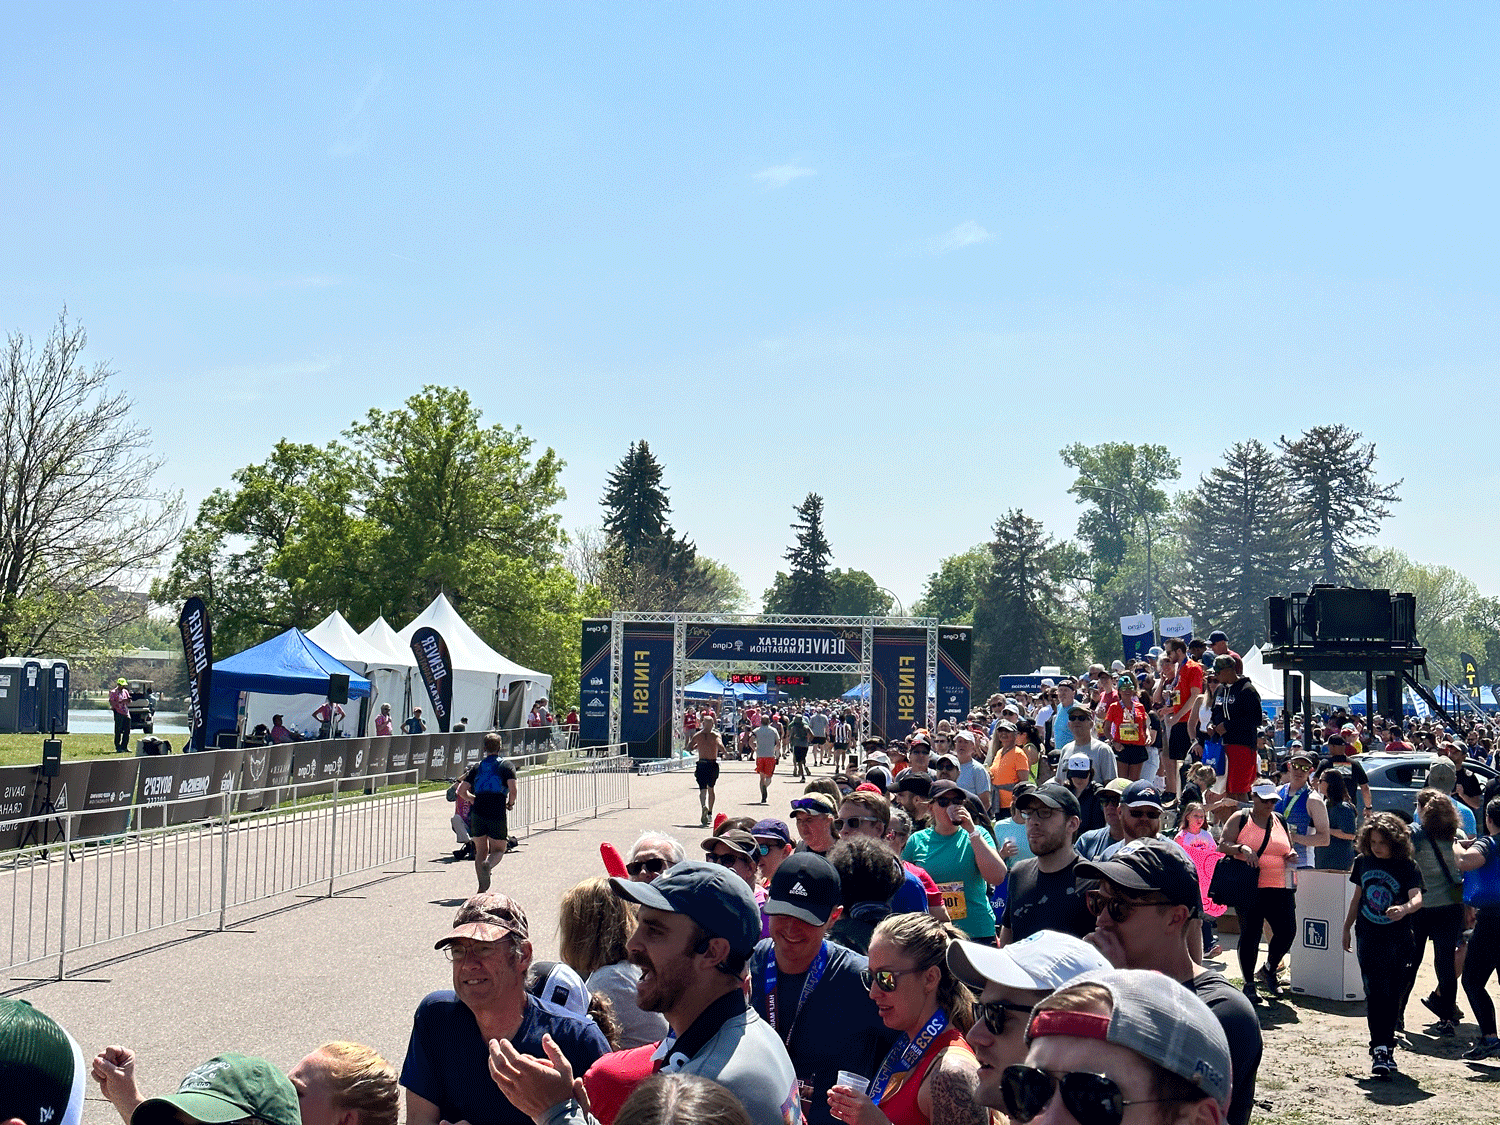 Runners crossing the finish line in front of a large crowd at the 2023 Denver Colfax Marathon